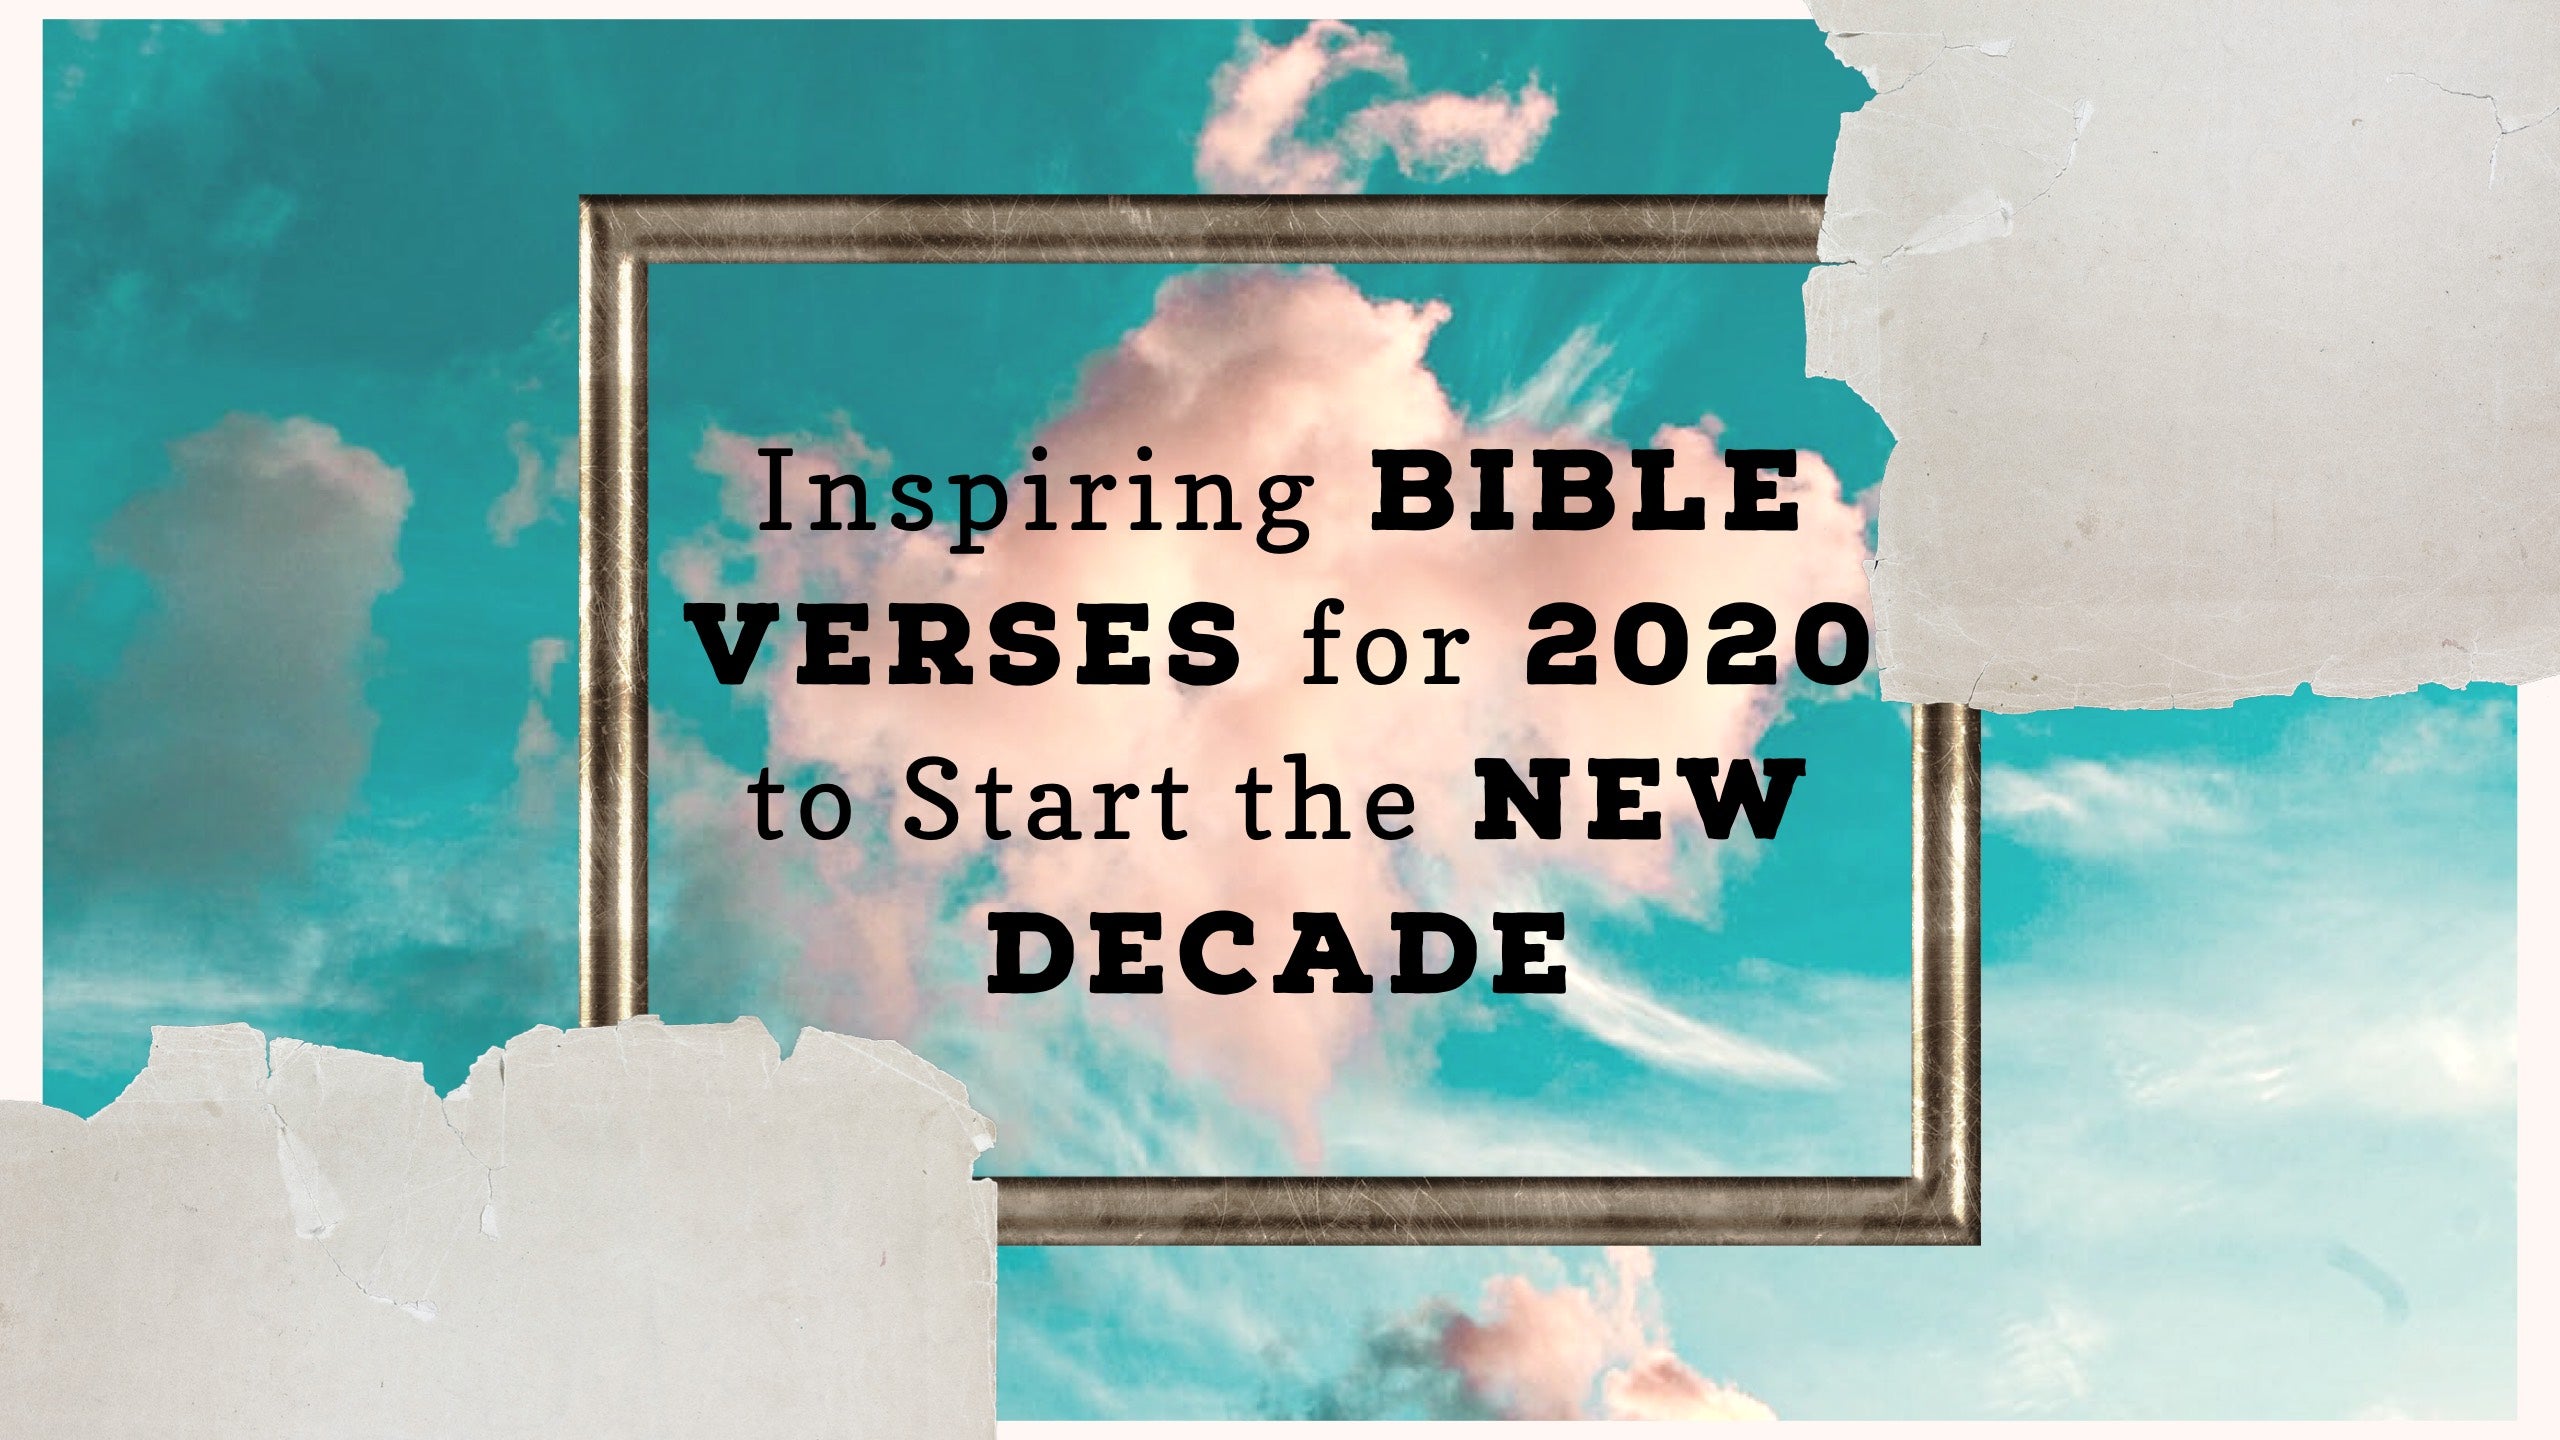 Inspiring Bible Verses for 2020 to Start the New Decade